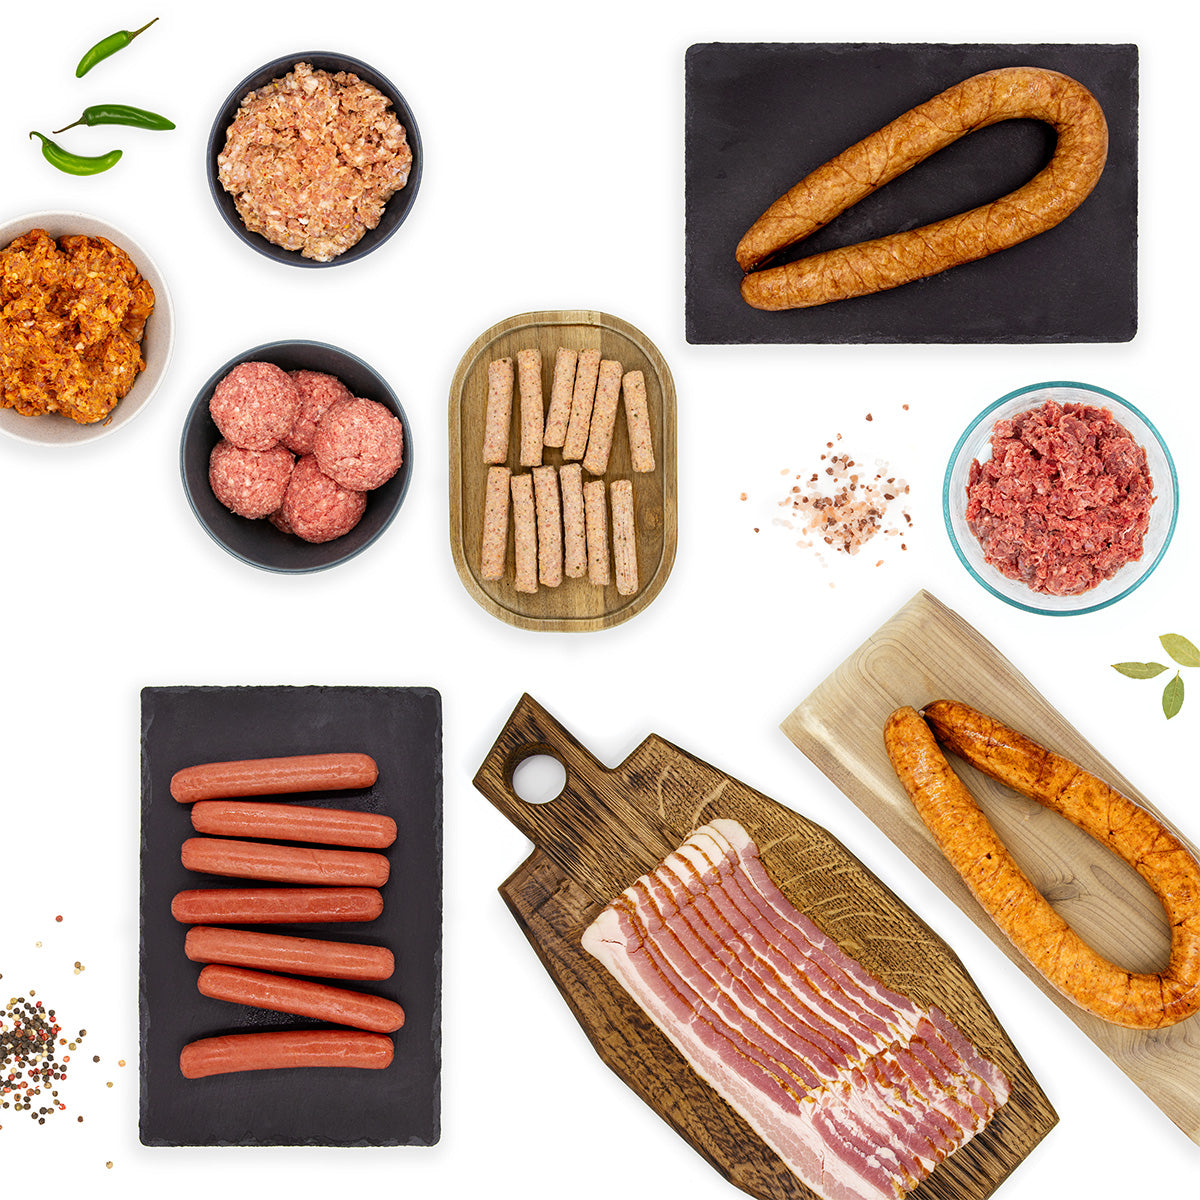 Whole30 Variety Pack lifestlye image featuring conected sausage, hot dogs, bacon, ground beef, ground sausage, breakfast sausage links, ground chorizo, ground bison